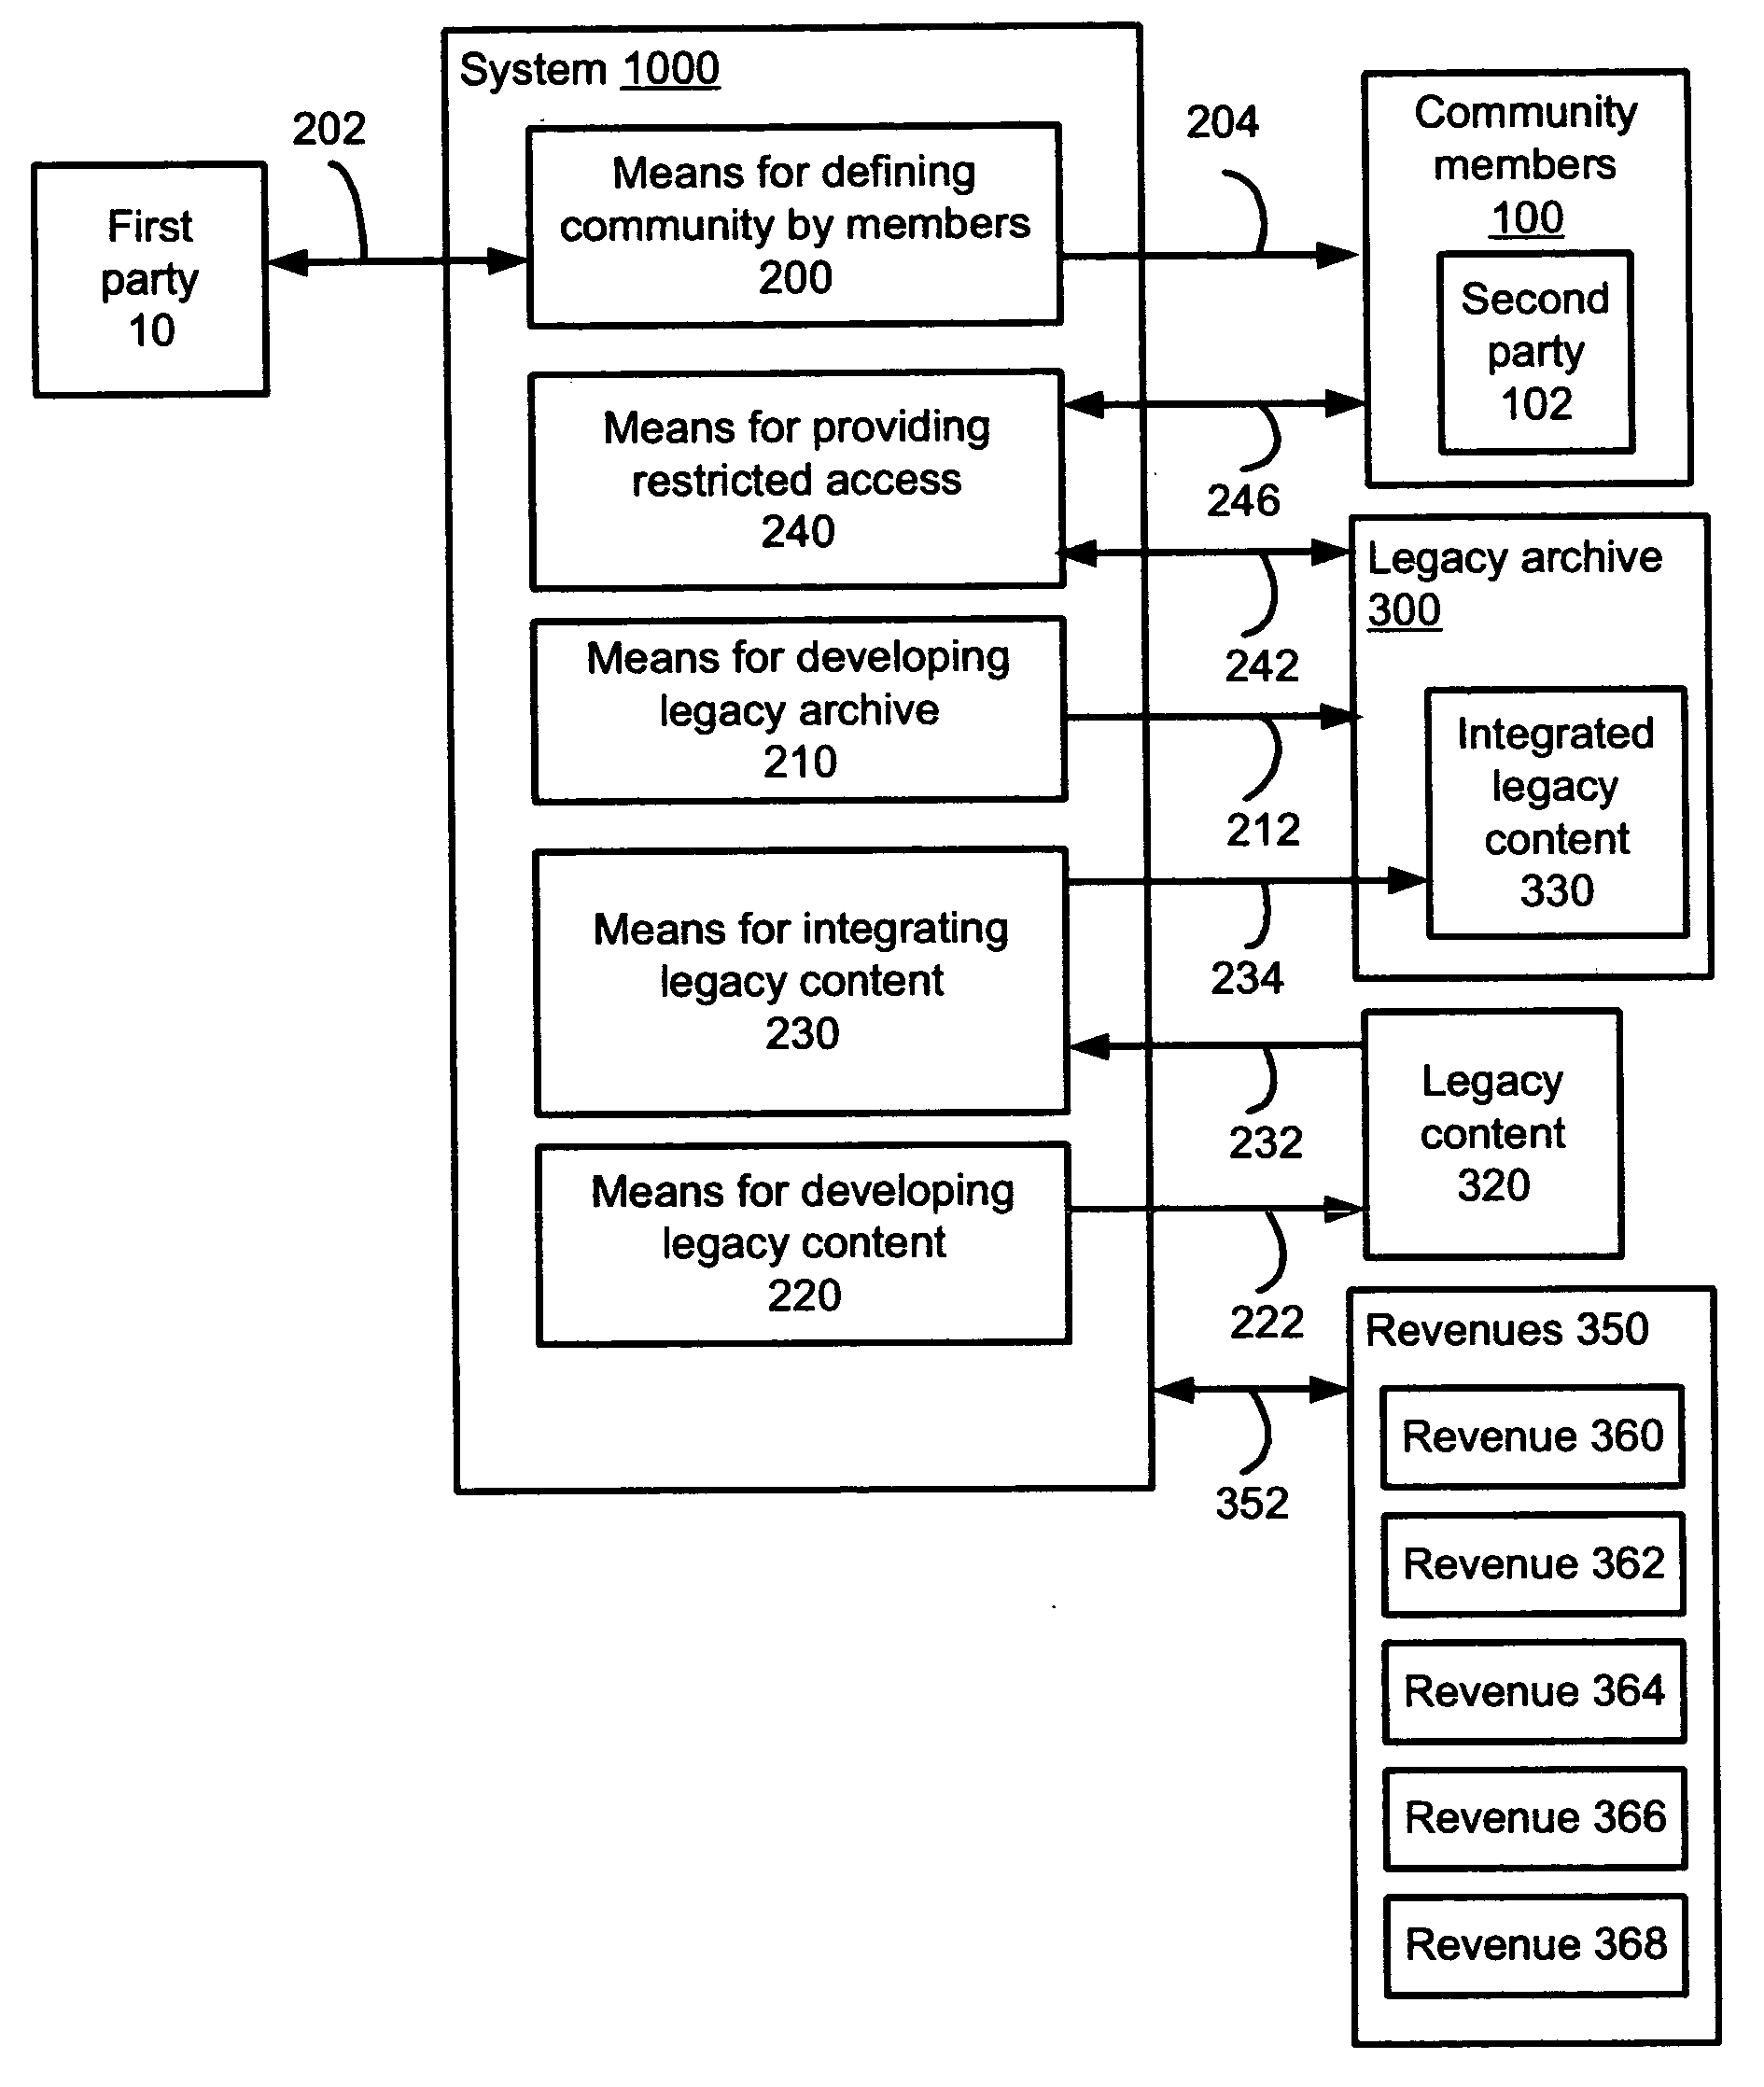 Method and apparatus providing community definition and legacy content development for legacy archives for restricted access by members of the community